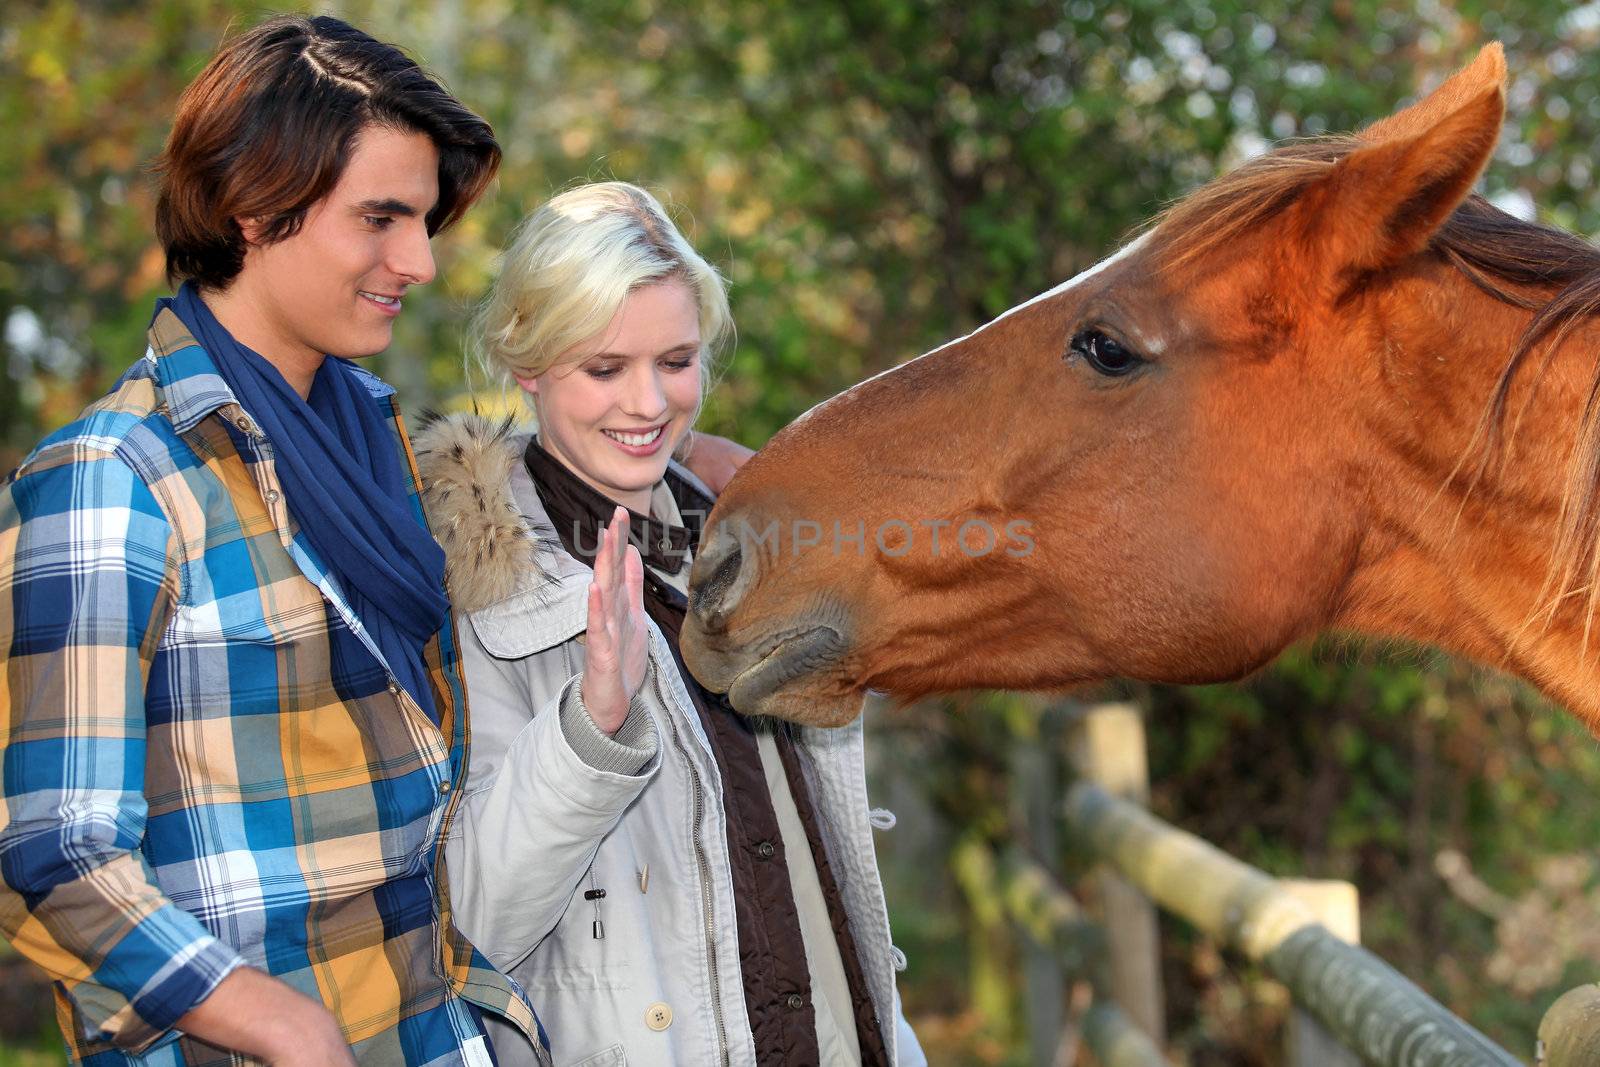 a couple and a horse asking for caress by phovoir